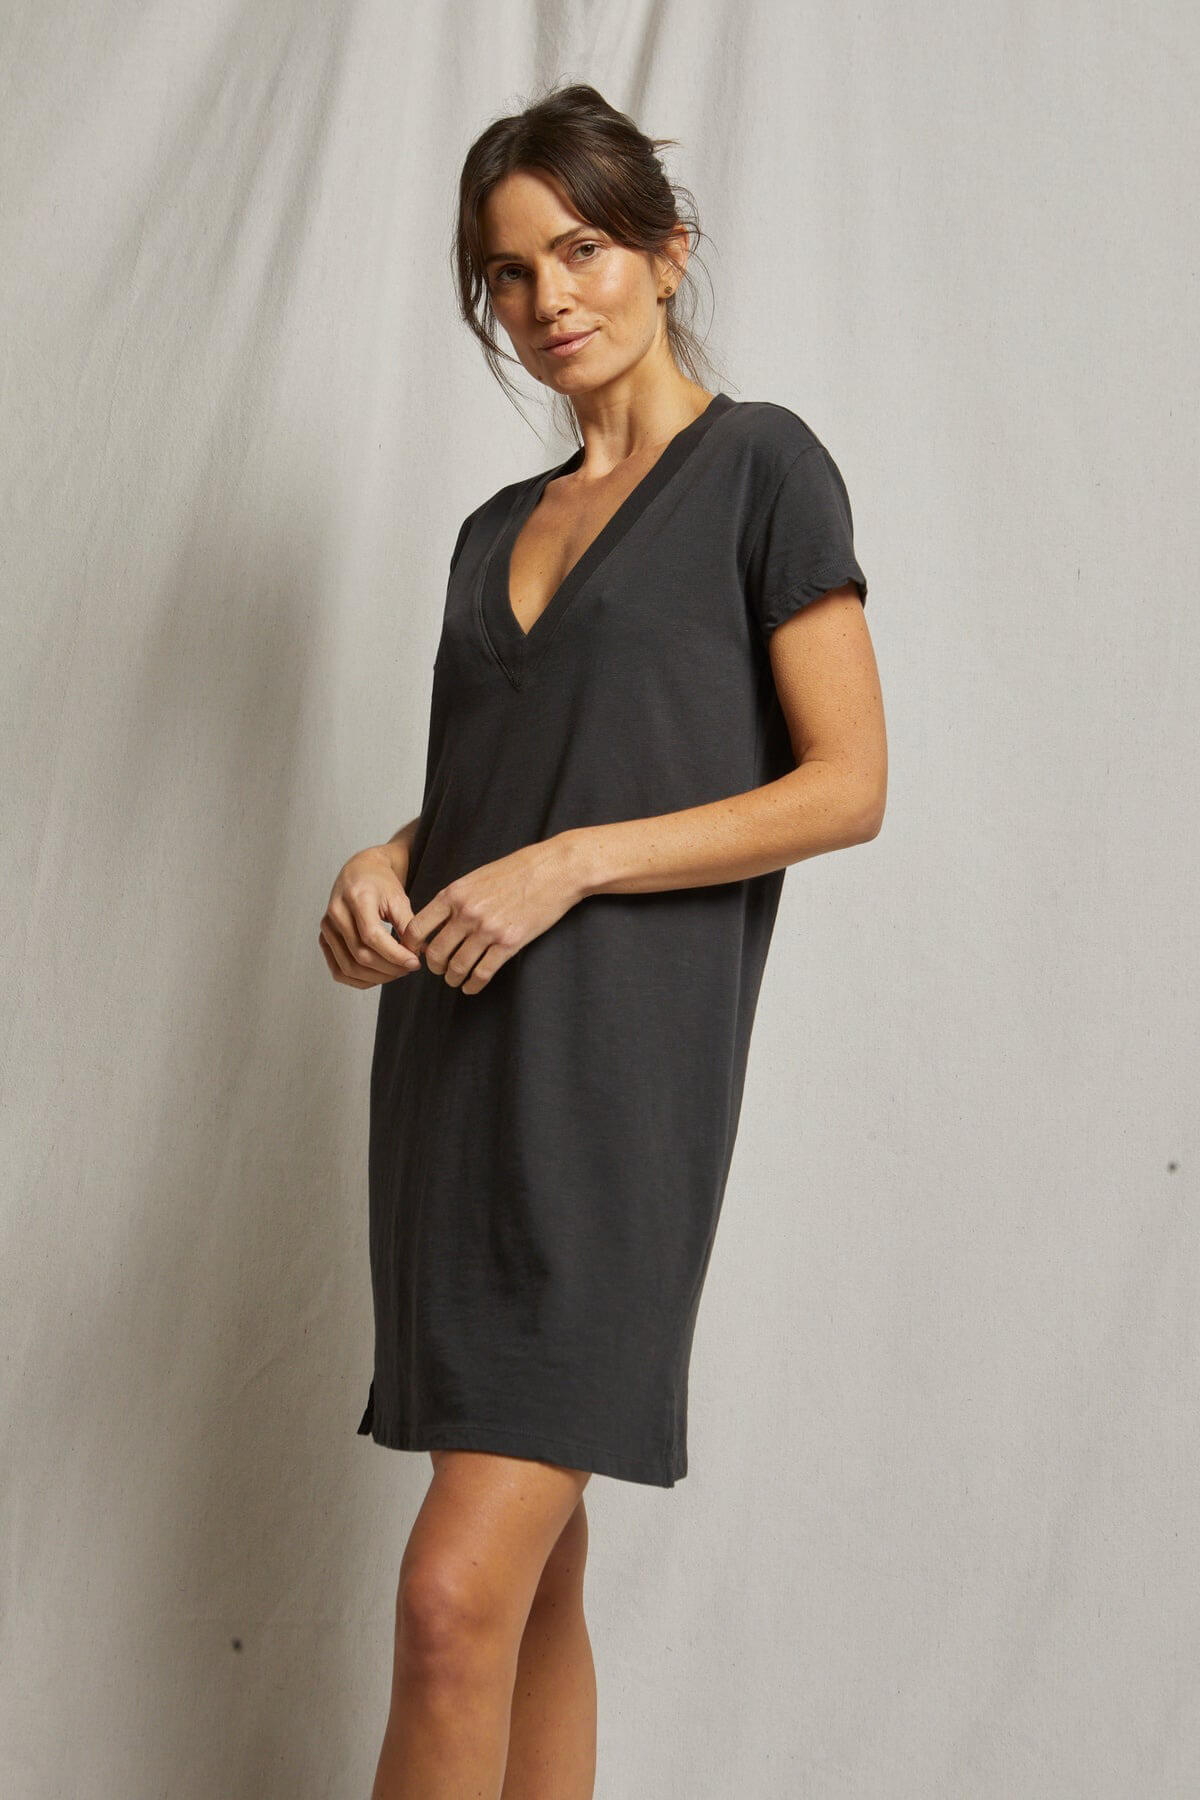 Perfect White Tee Opal jersey v neck dress in vintage black